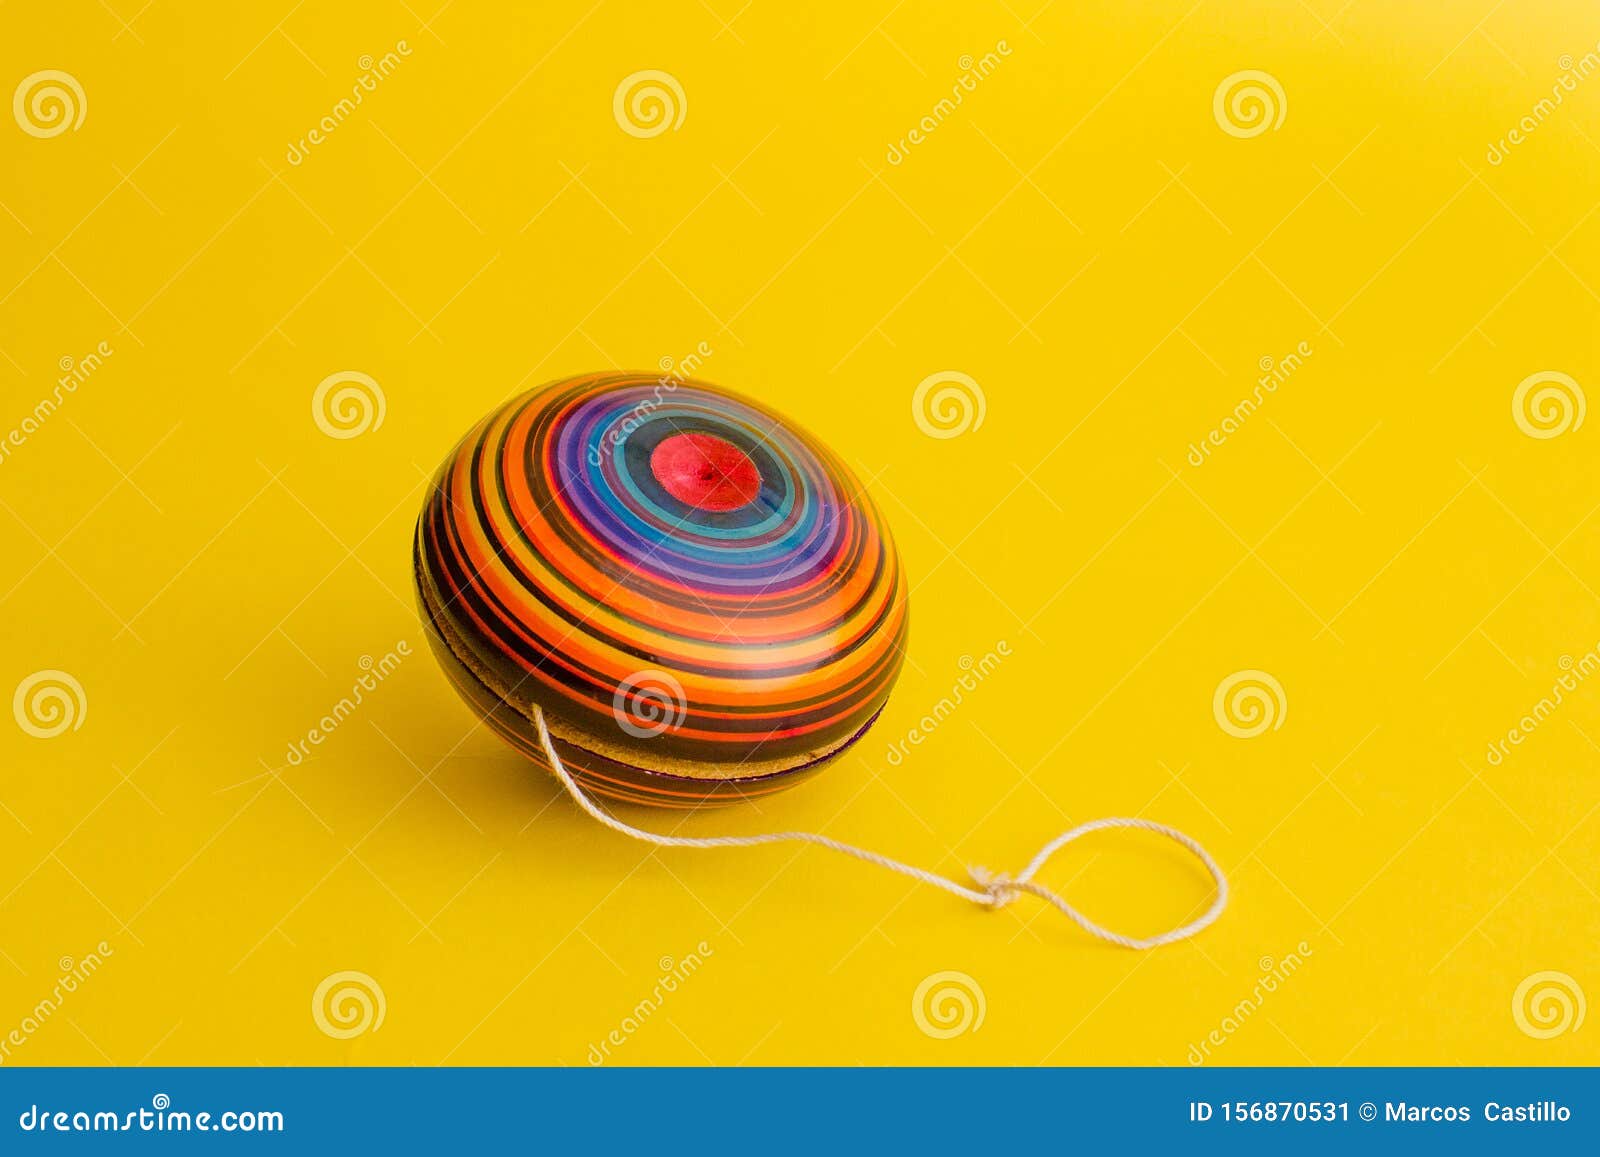 mexican toys, yoyo from wooden in mexico on yellow background